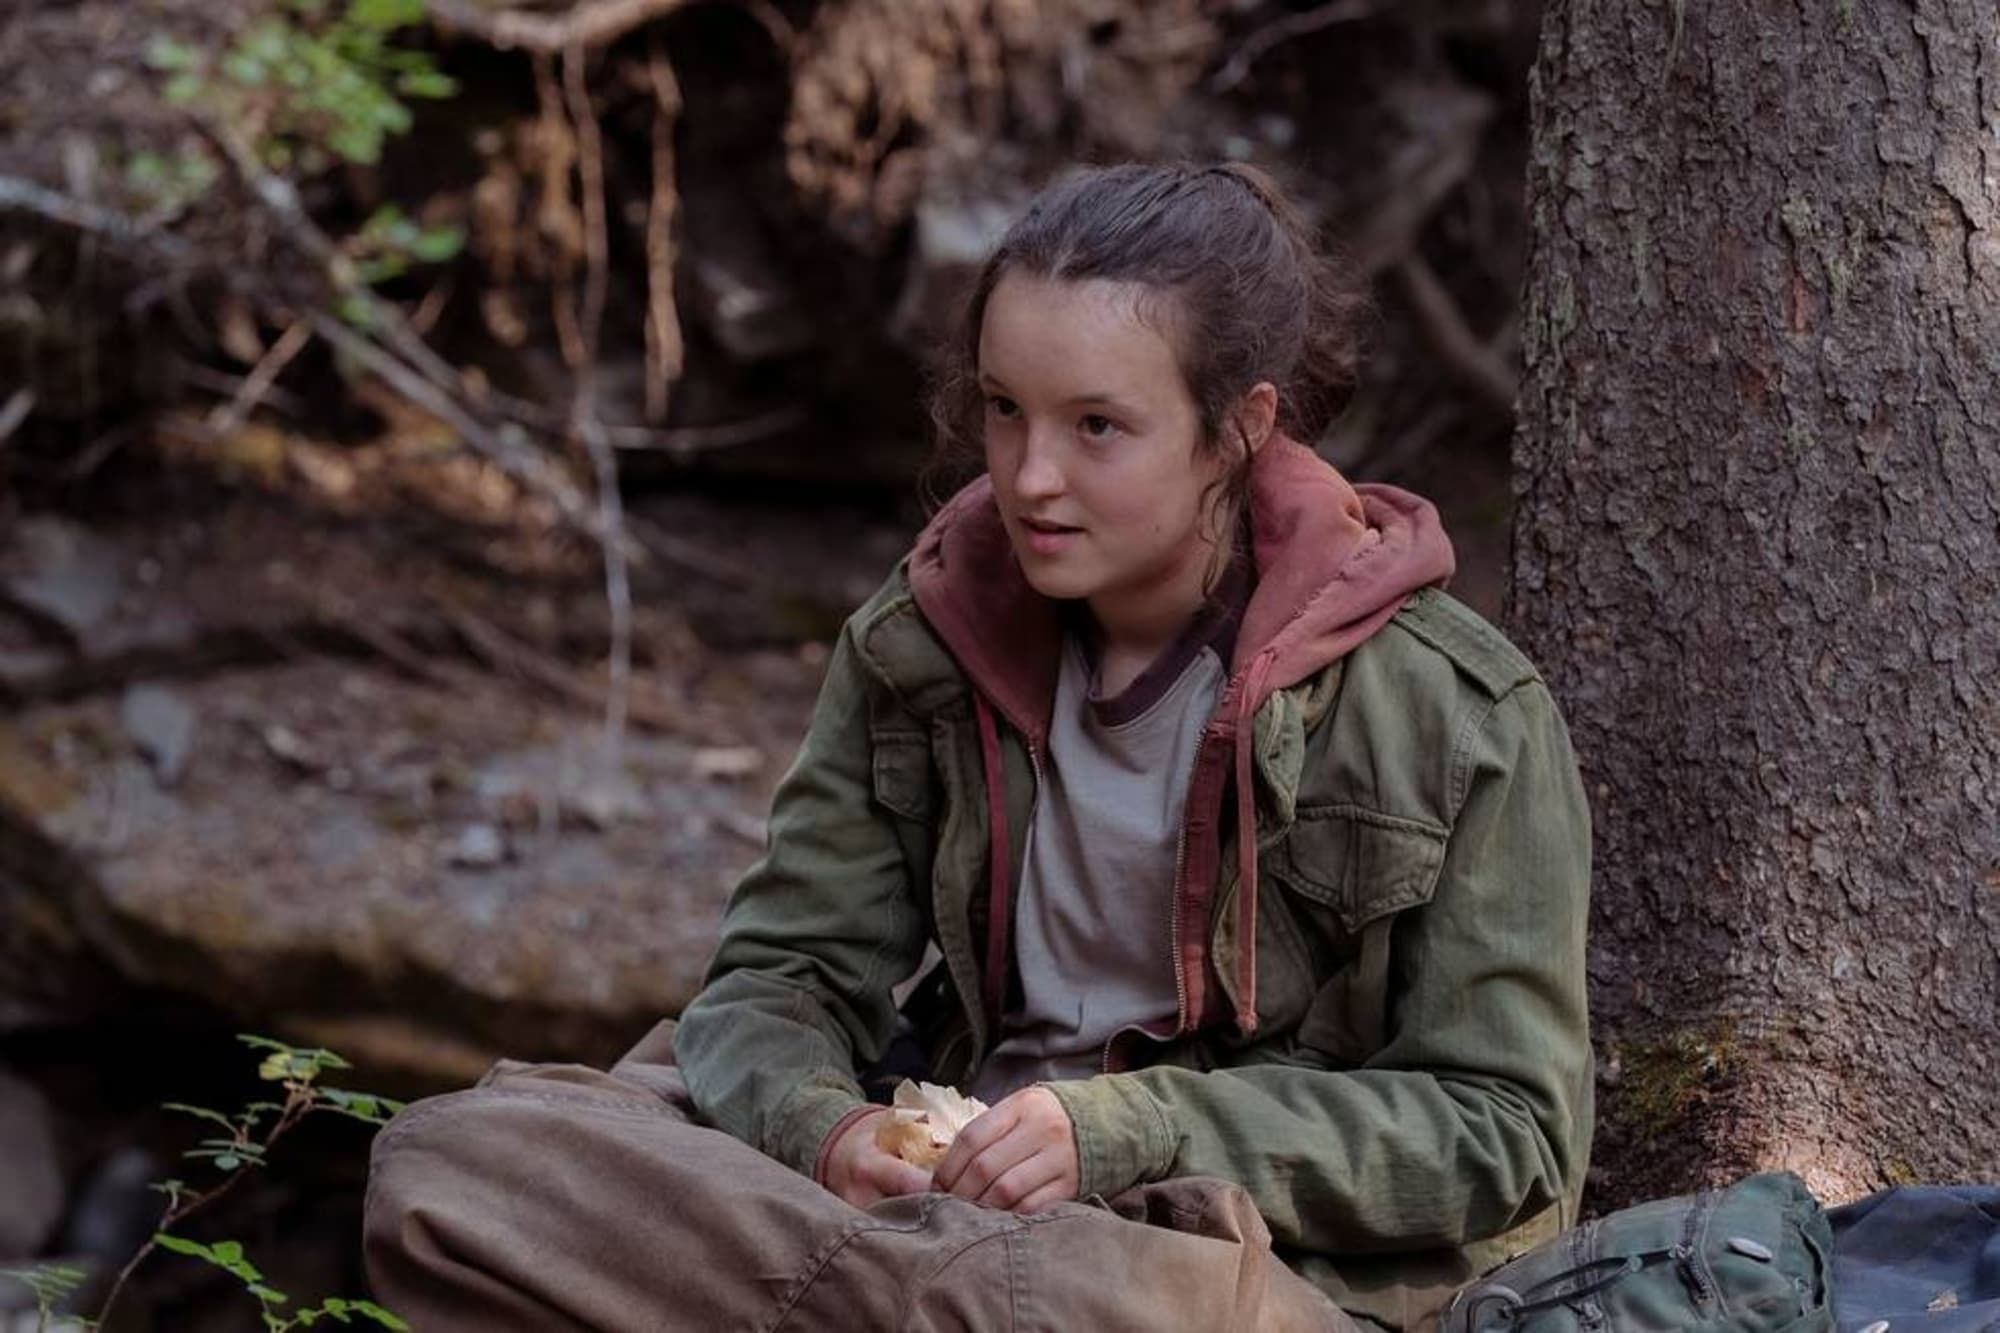 Why The Last of Us Star Bella Ramsey Almost Didn't Take the Role